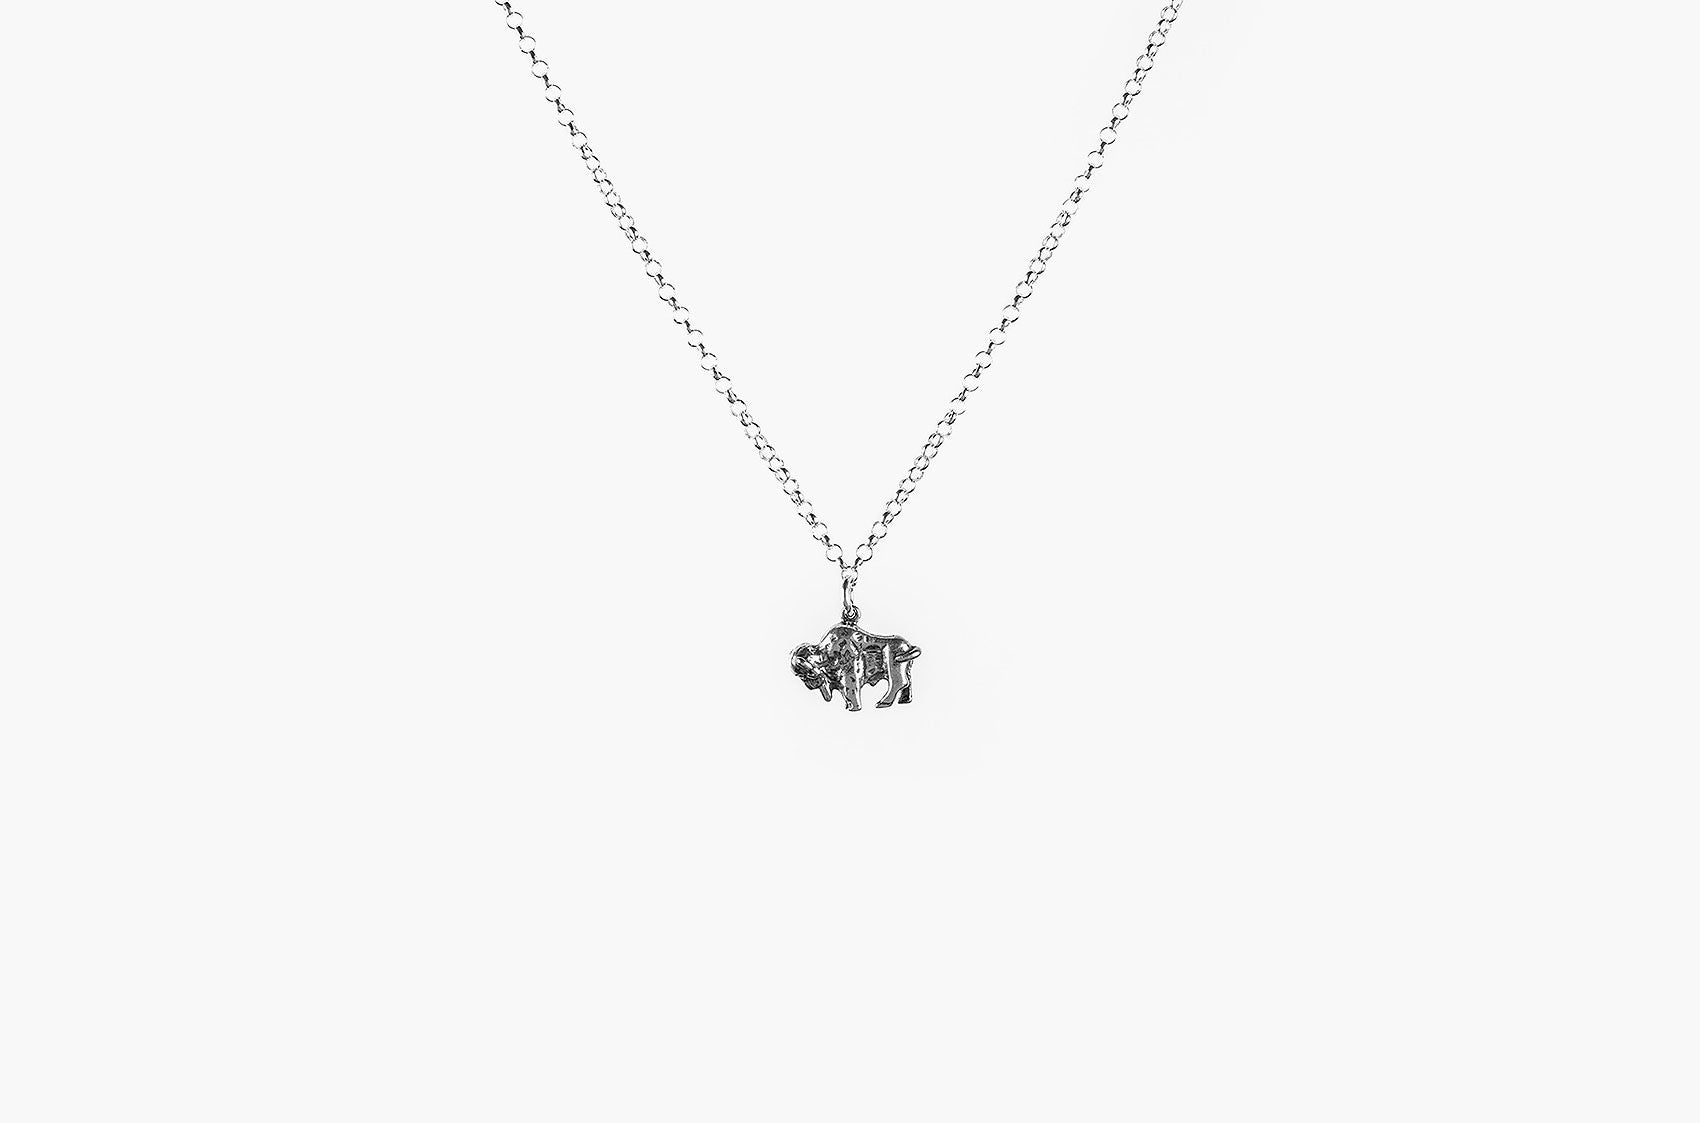 Prairie Pendant. Charm necklace in sterling silver